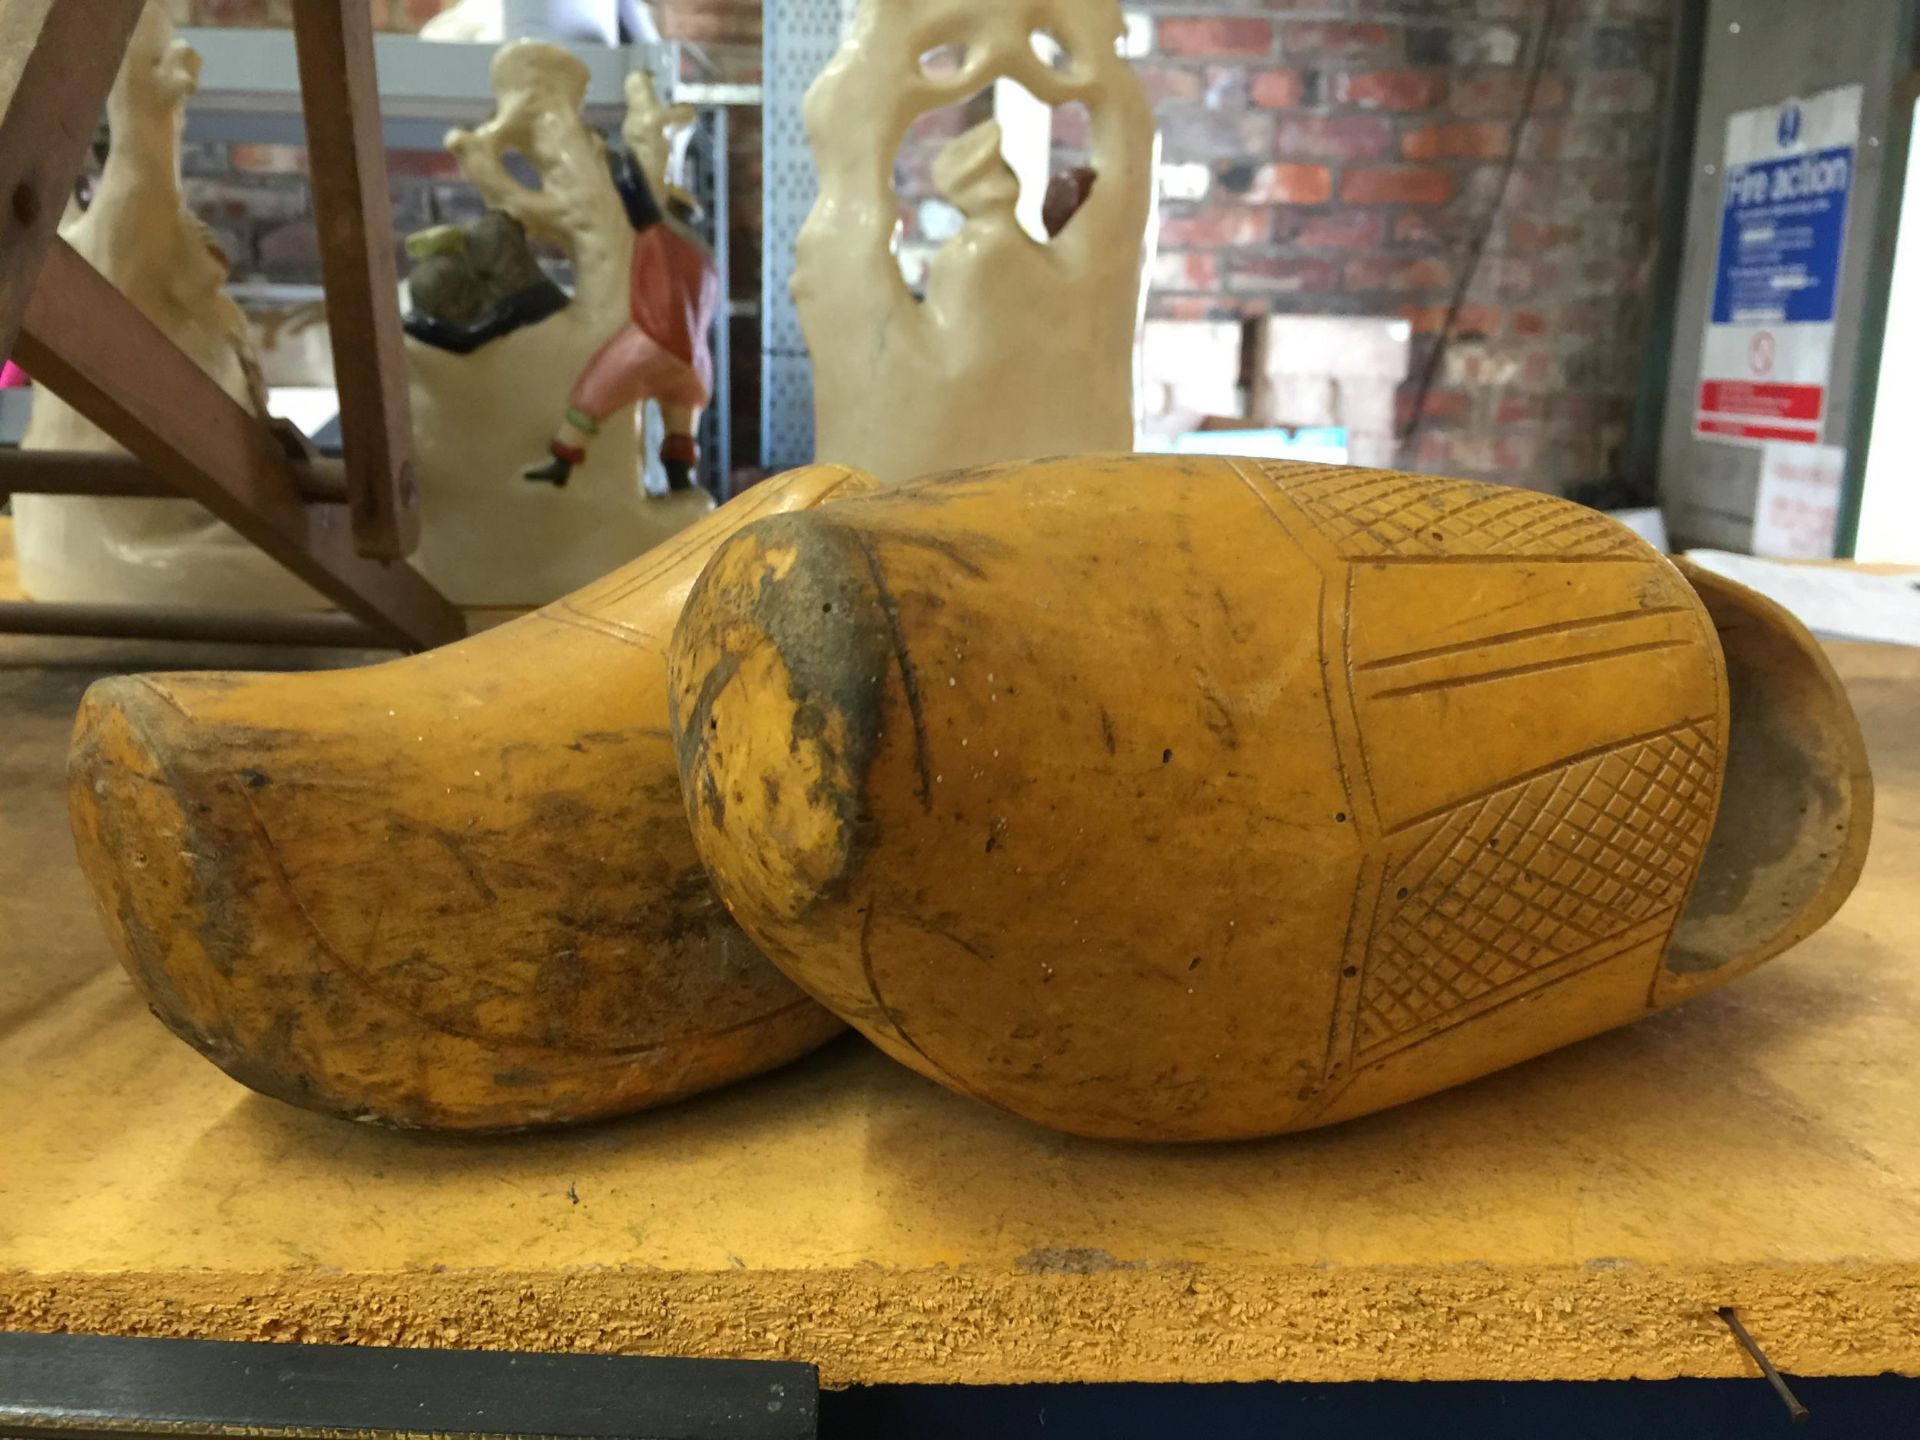 A LARGE PAIR OF VINTAGE WOODEN CLOGS